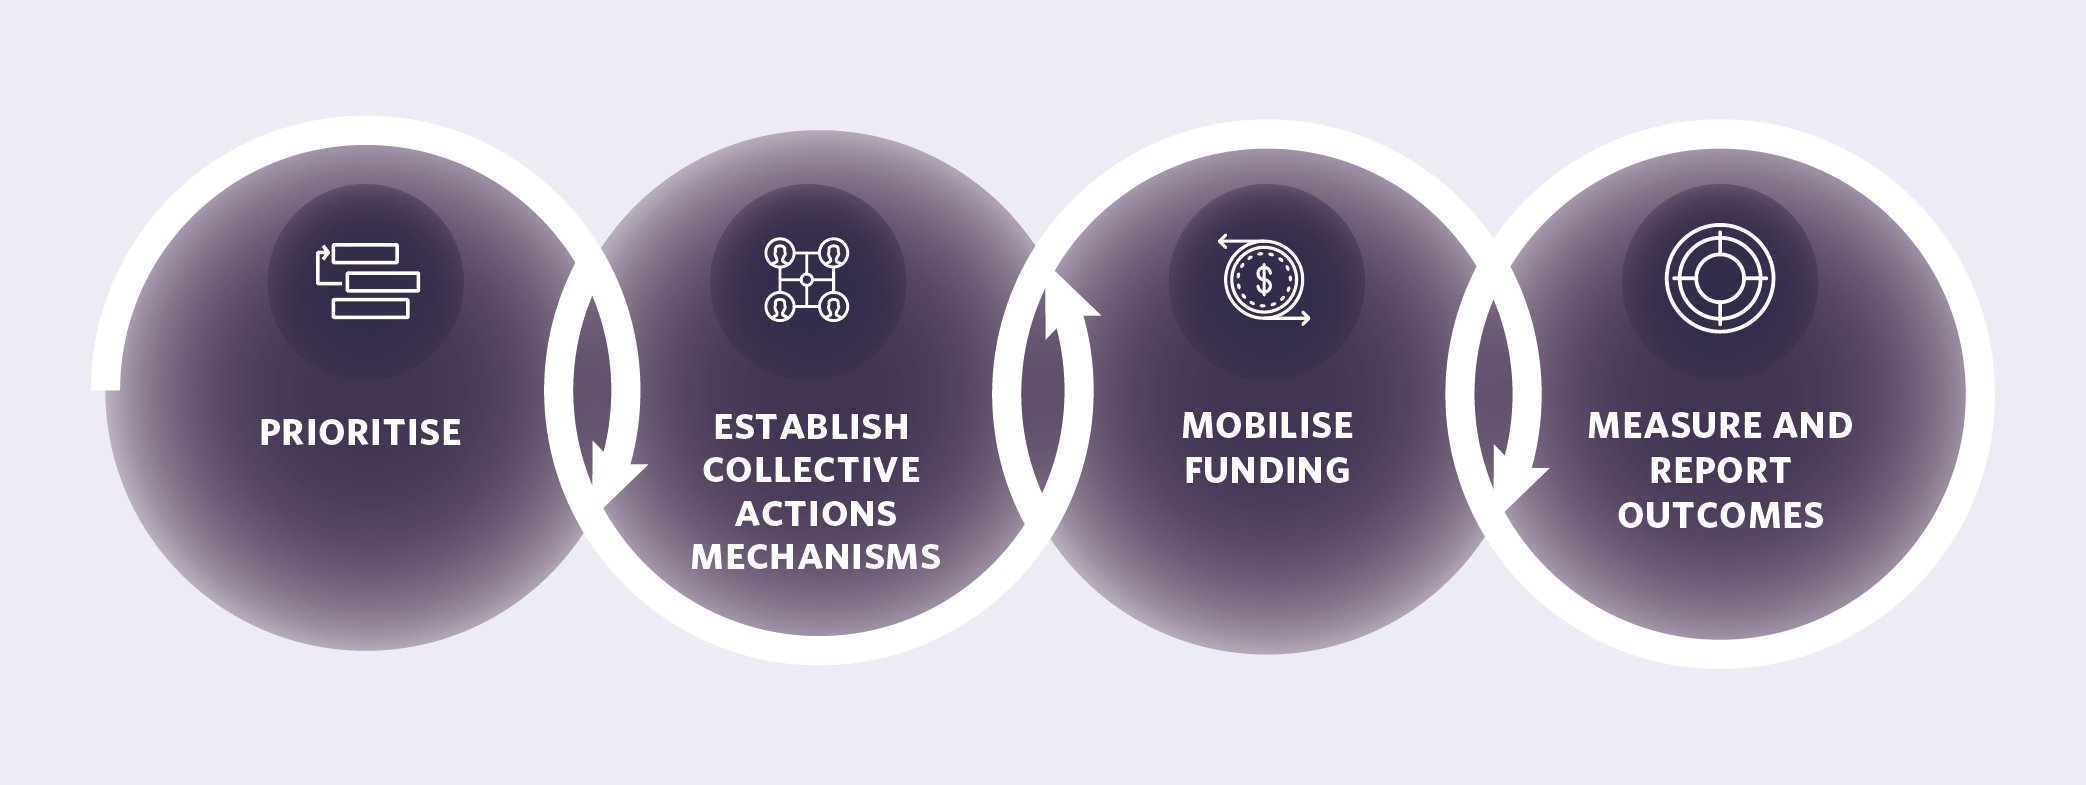 four circles outlining recommendations of report, prioritise, establish collective actions mechanisms, mobilise funding, measure and report outcomes